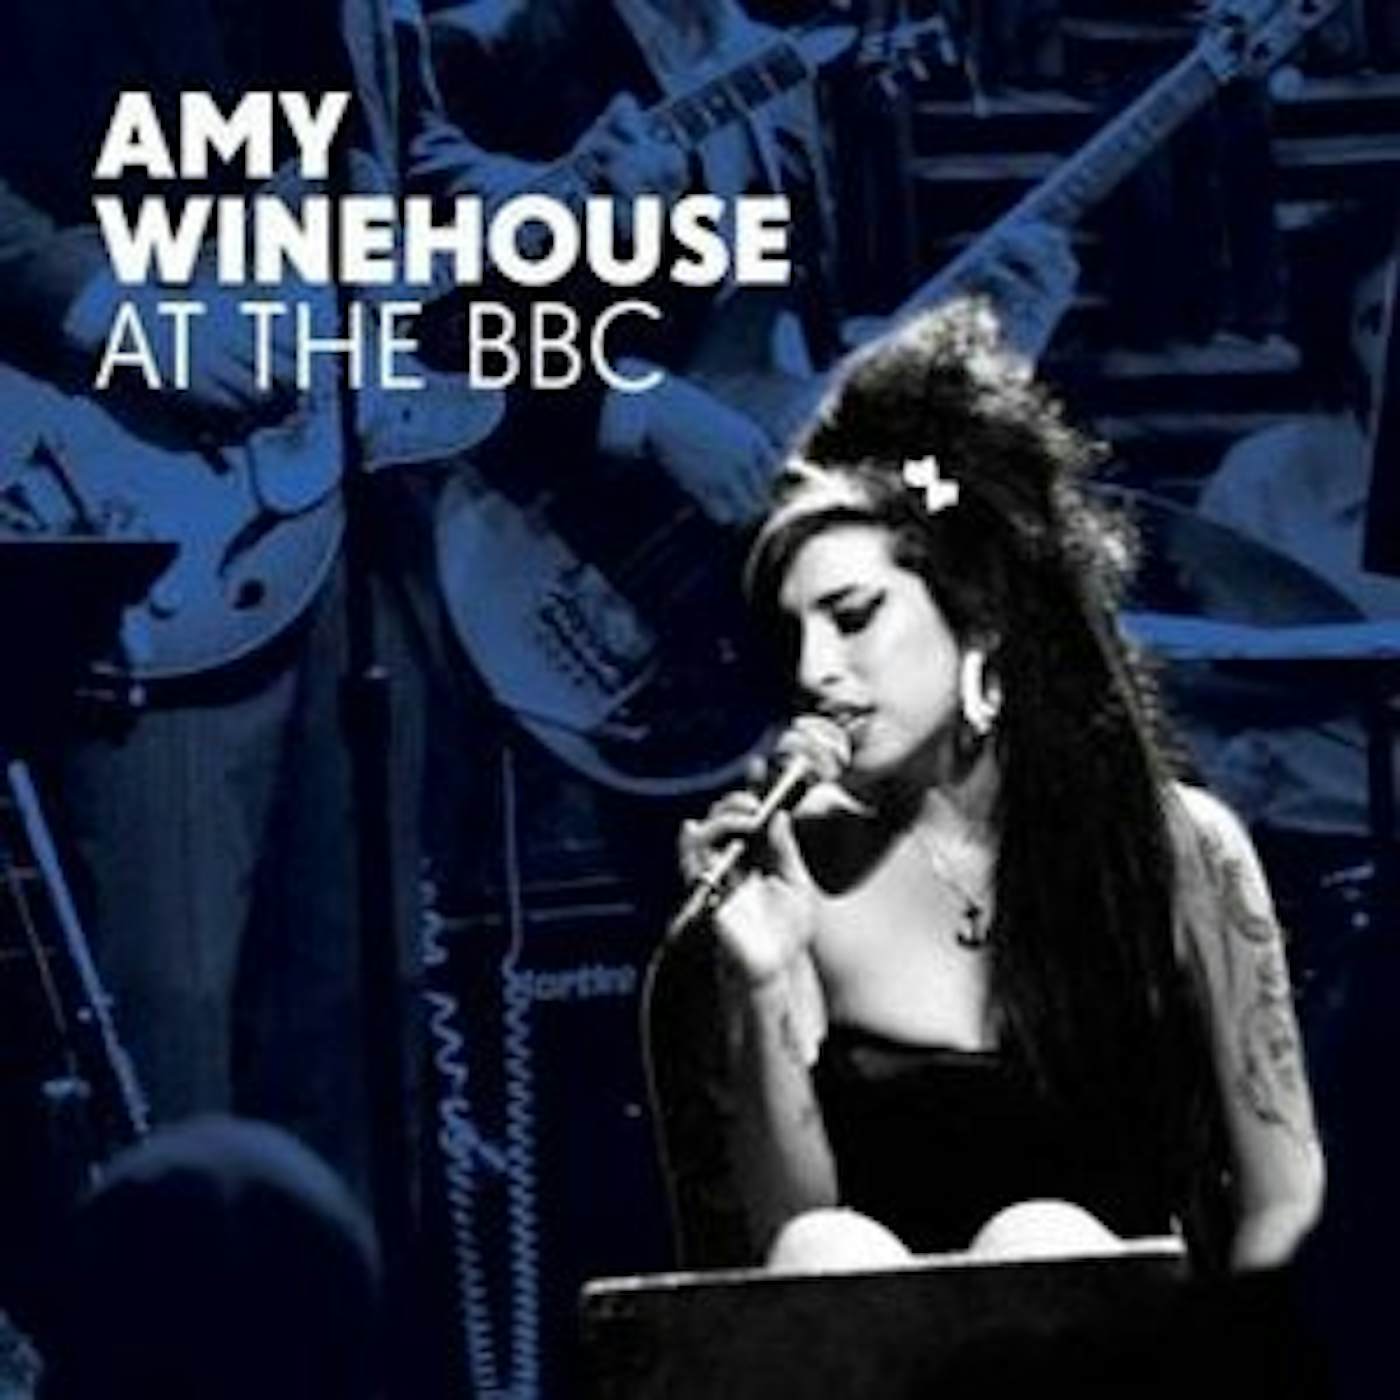 AMY WINEHOUSE AT THE BBC CD